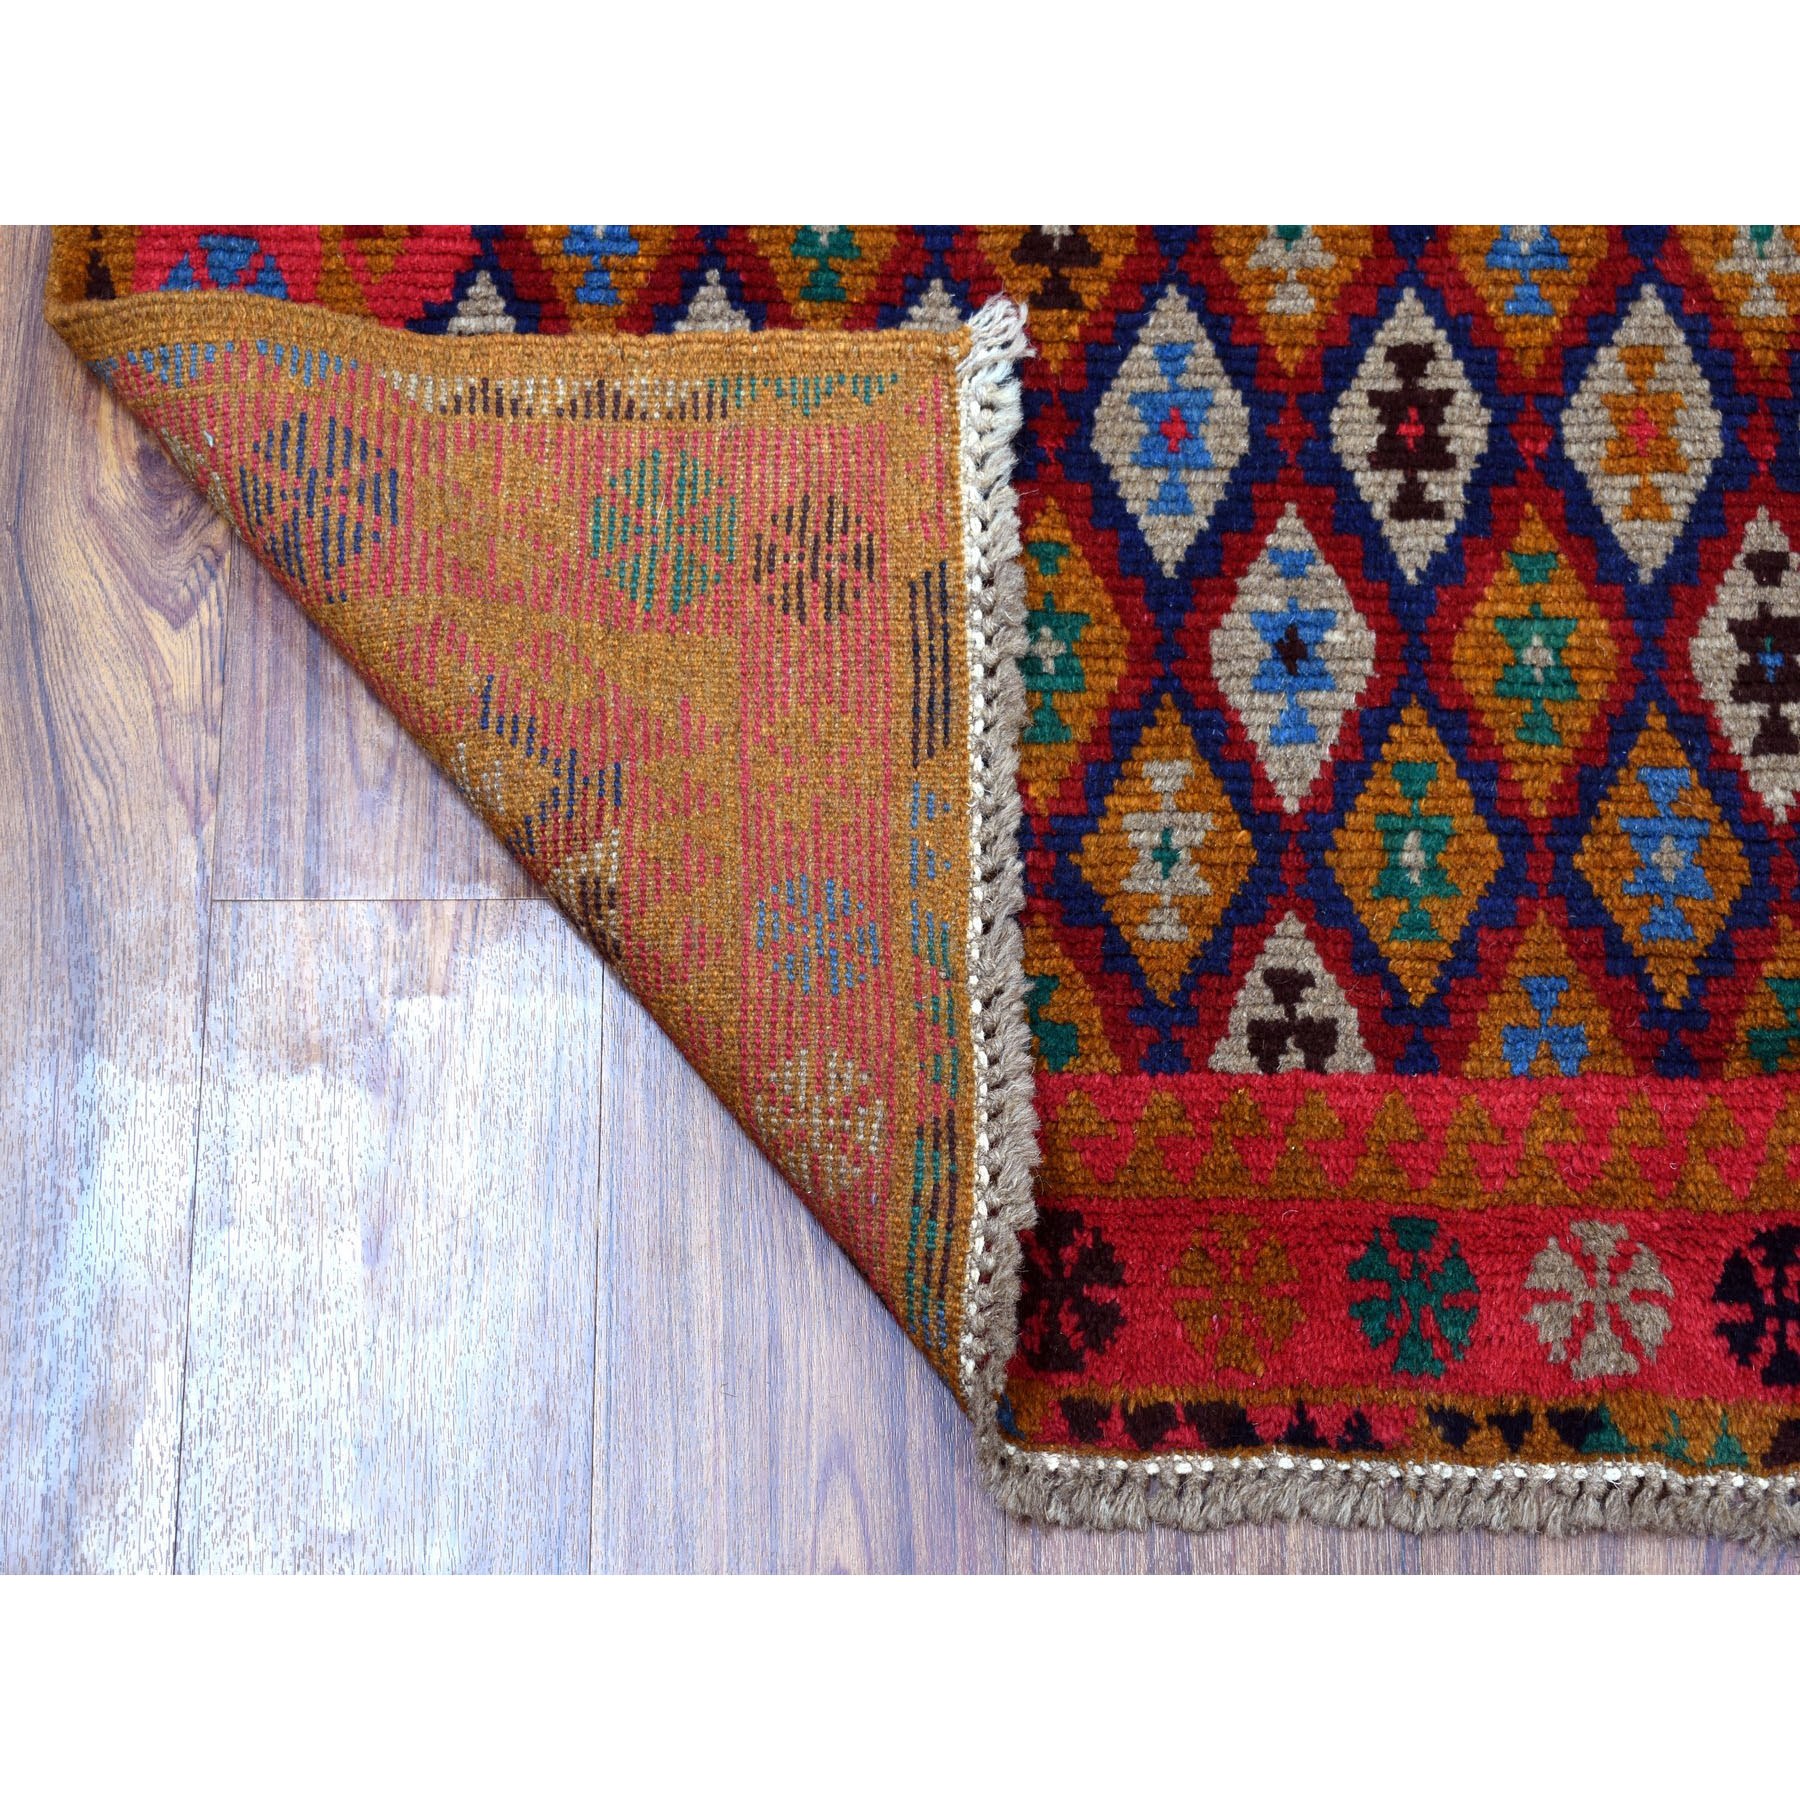 4'x6'1" Colorful All Over Design Colorful Afghan Baluch Hand Woven Pure Wool Oriental Rug 